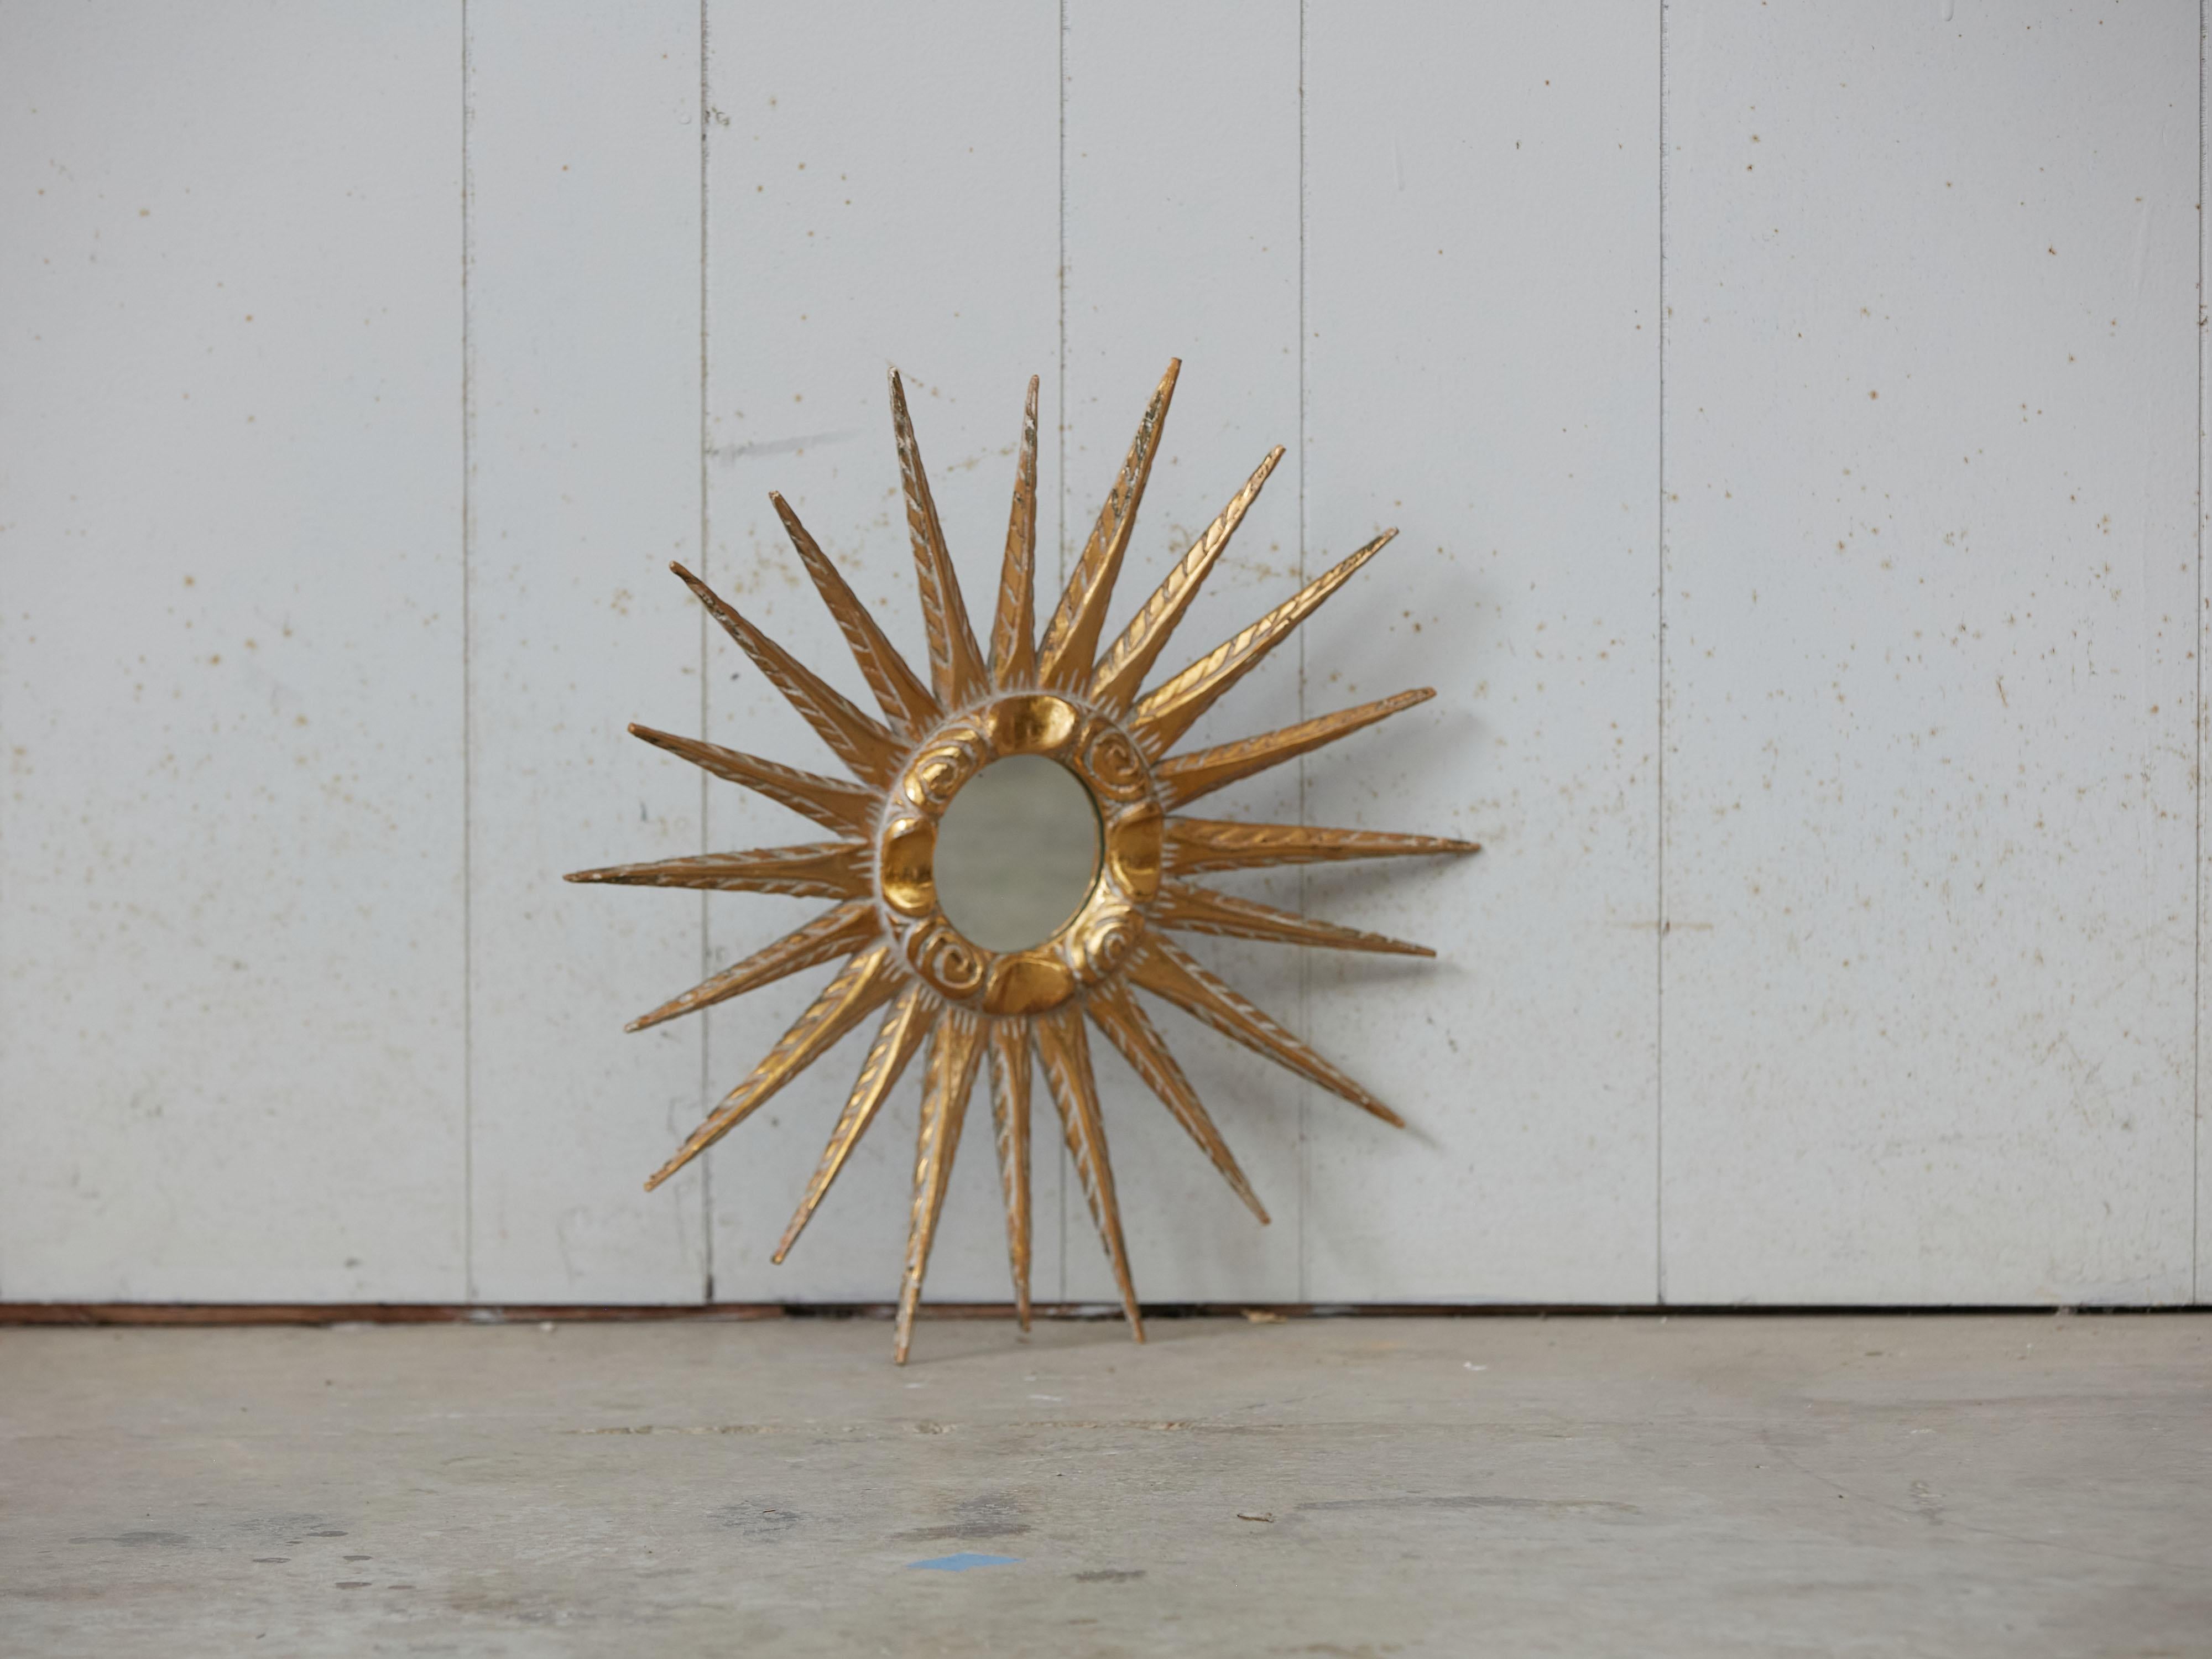 20th Century Midcentury French Giltwood Sunburst Mirror with Cloudy Frame, circa 1950